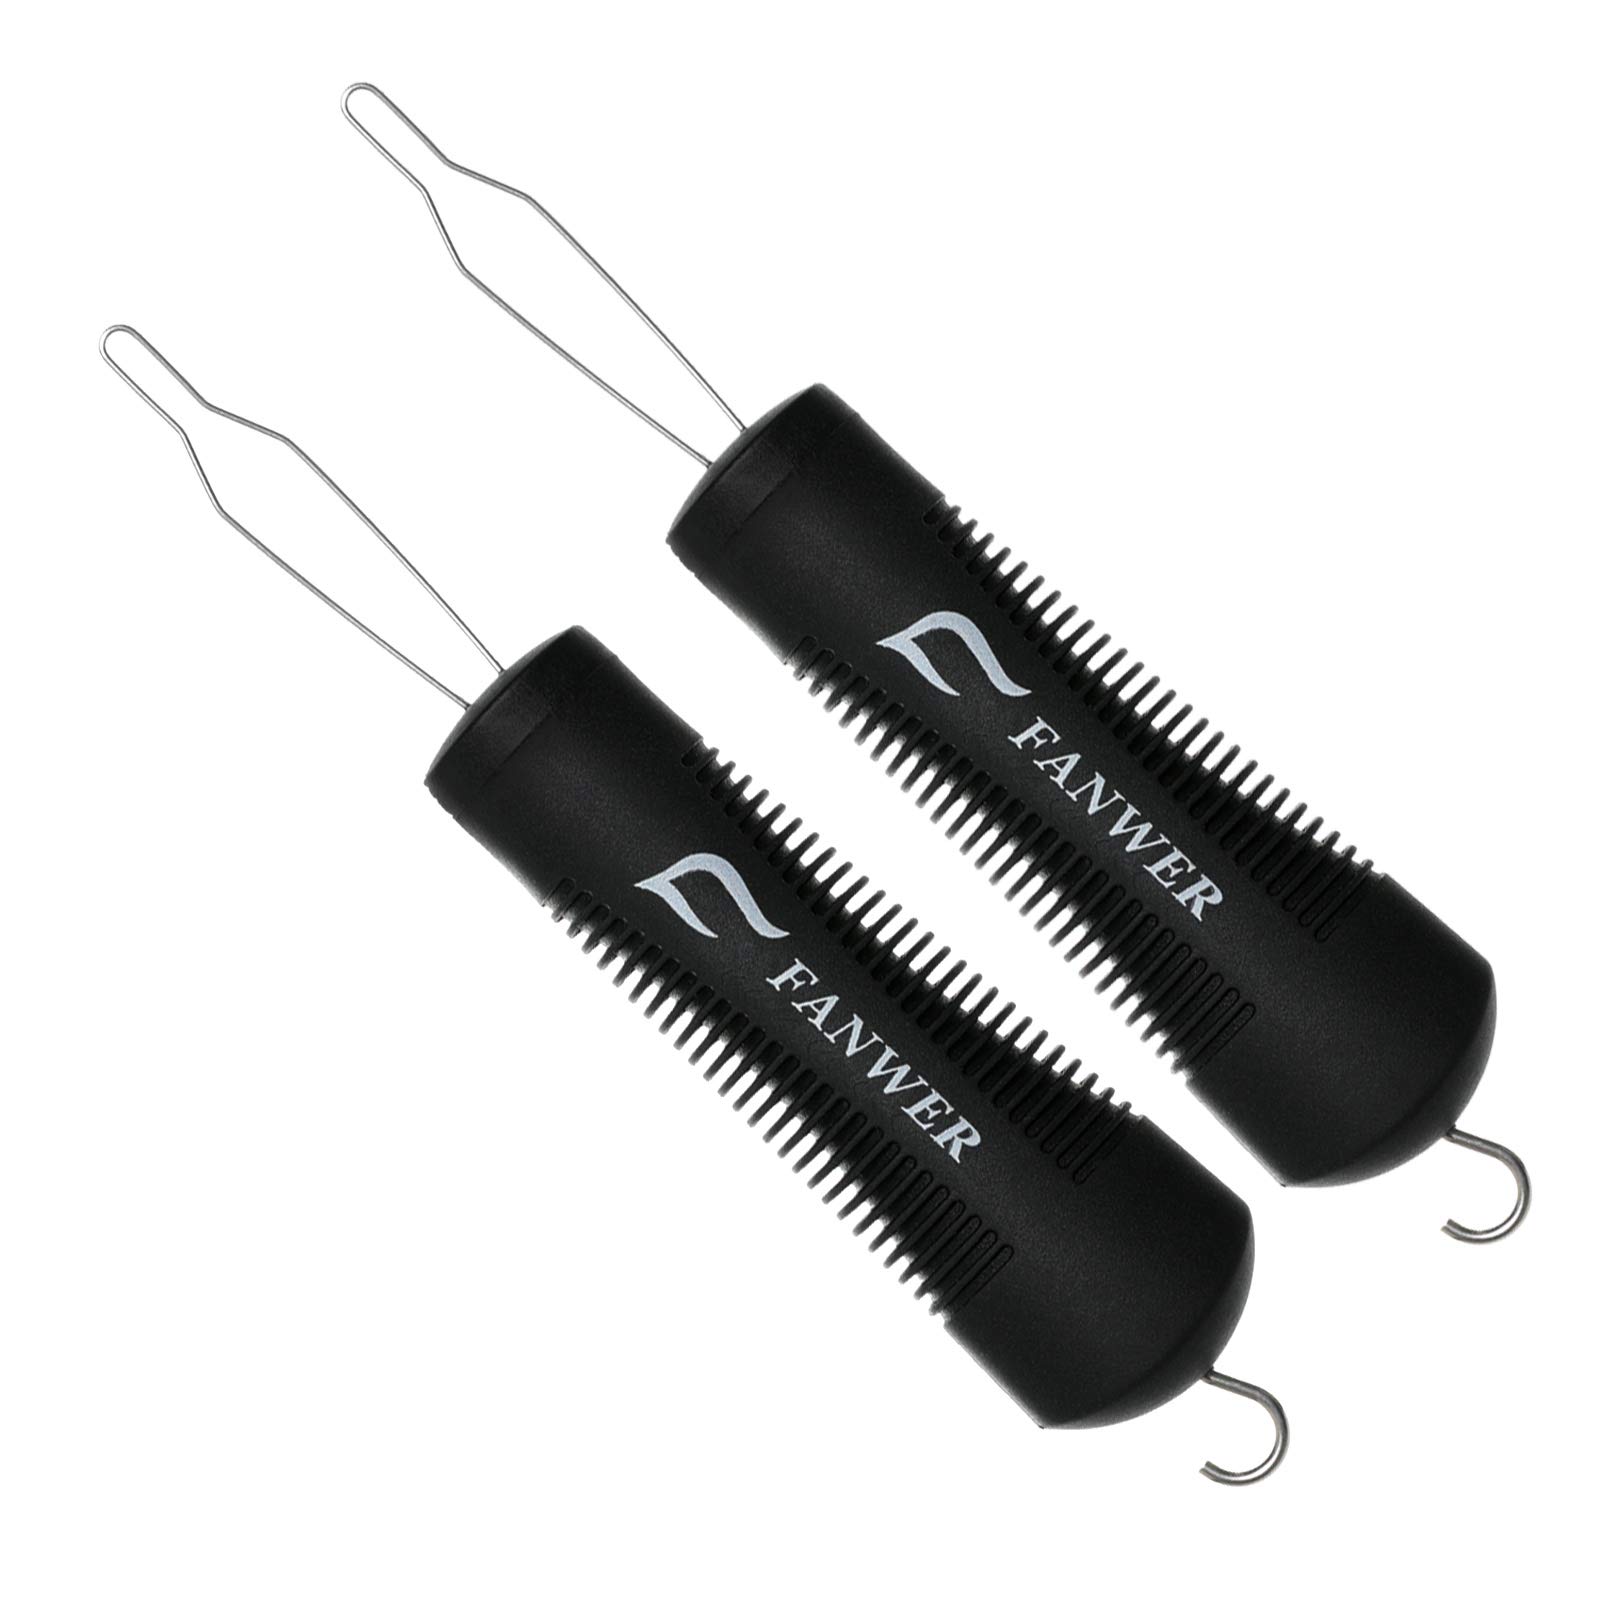 No Grip Button and Zipper Aid 2 Pack